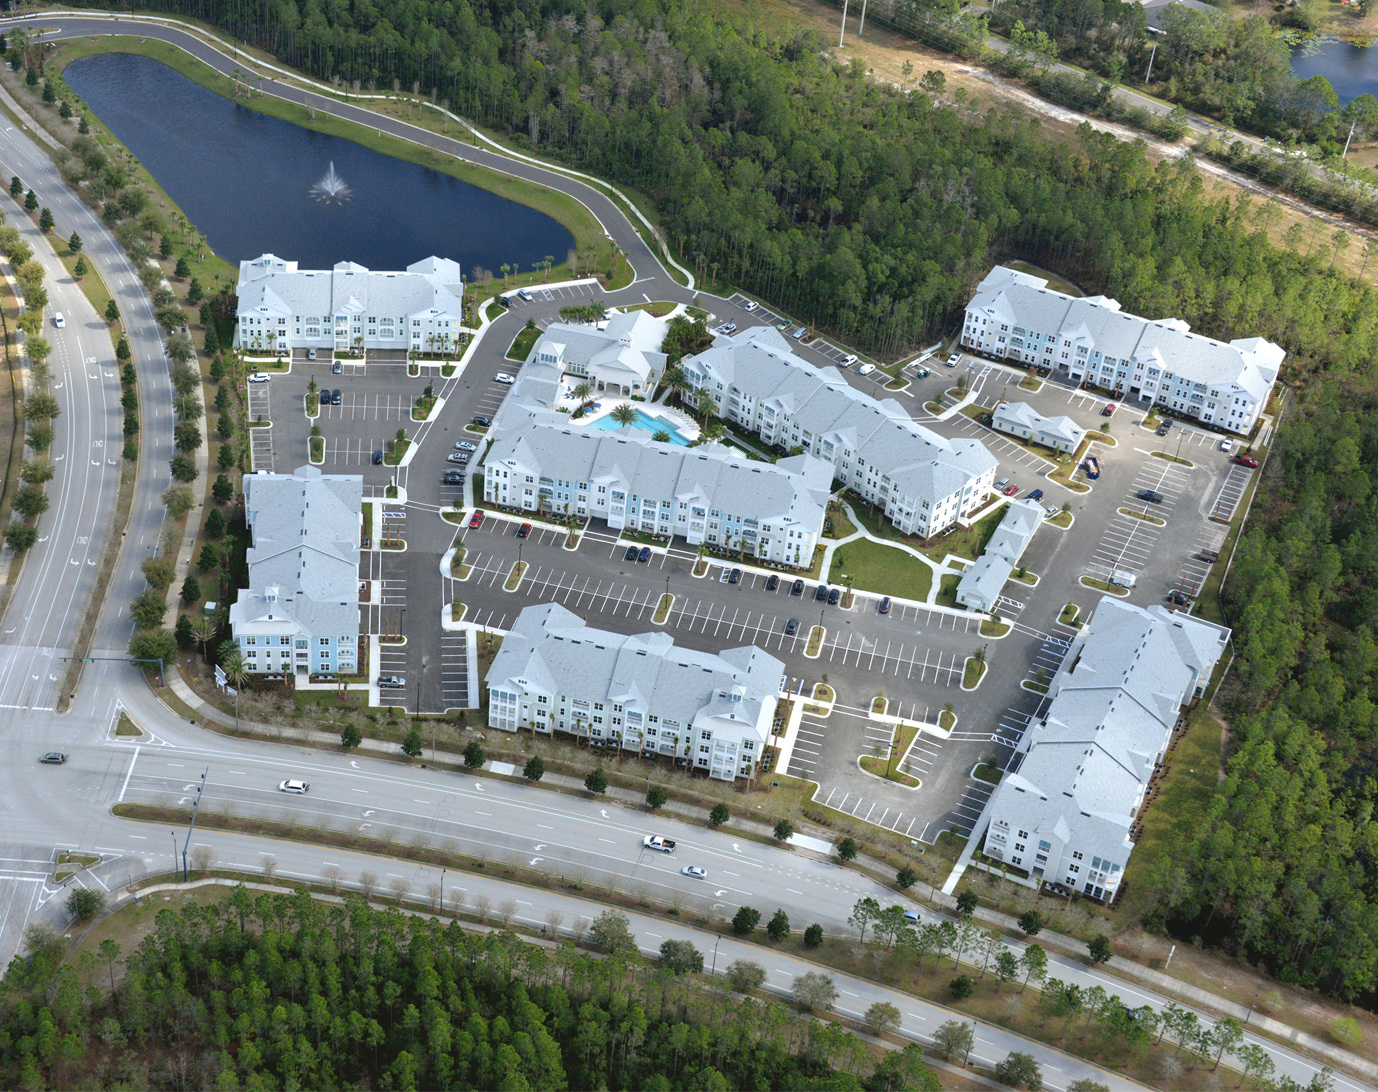 Luxury multi story apartment complex aerial view